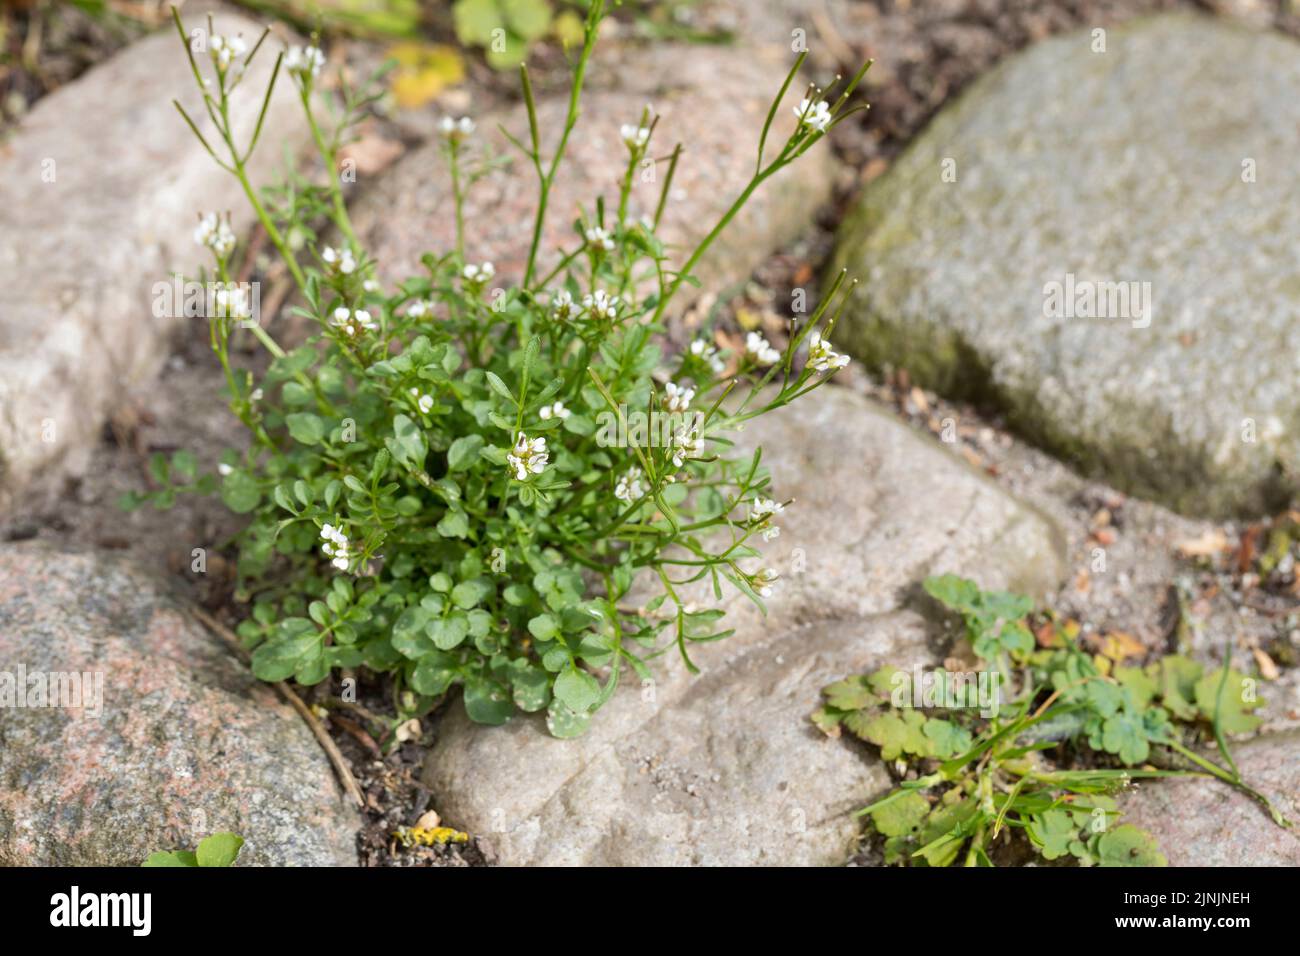 Hairy bitter-cress (Cardamine hirsuta), growing among cobbling stones in the city, Germany Stock Photo